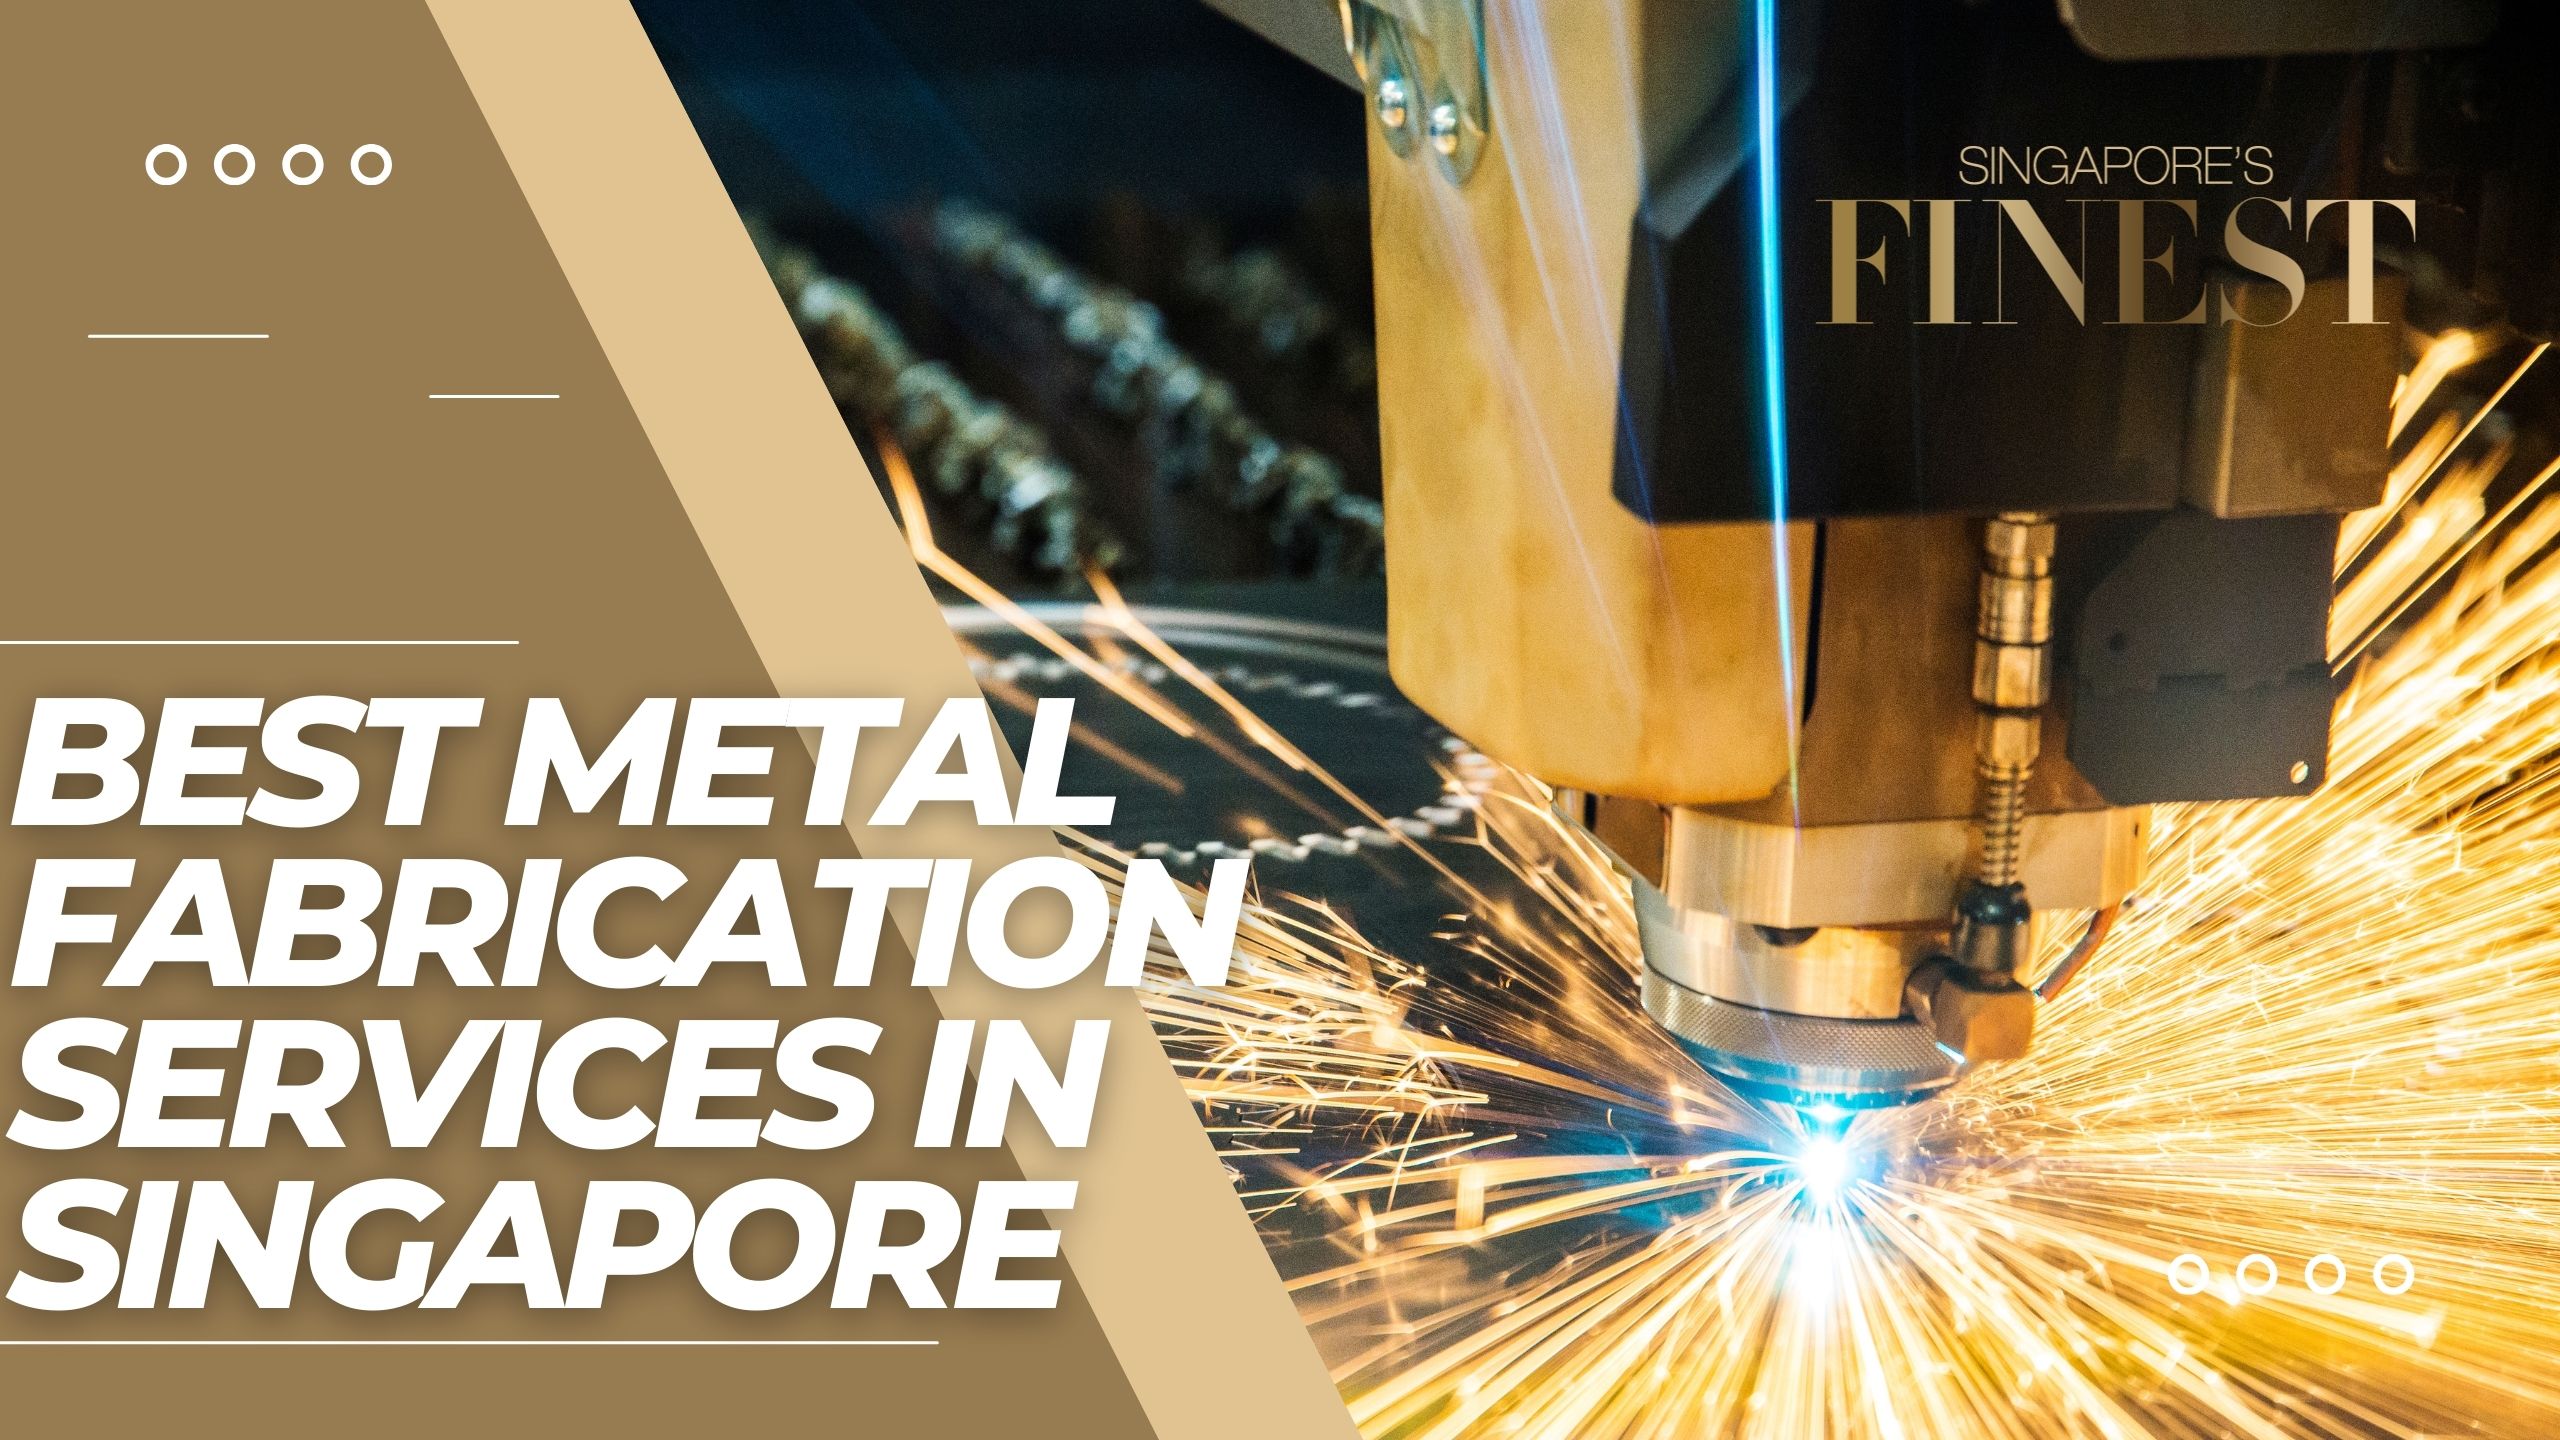 The Finest Metal Fabrication Services in Singapore